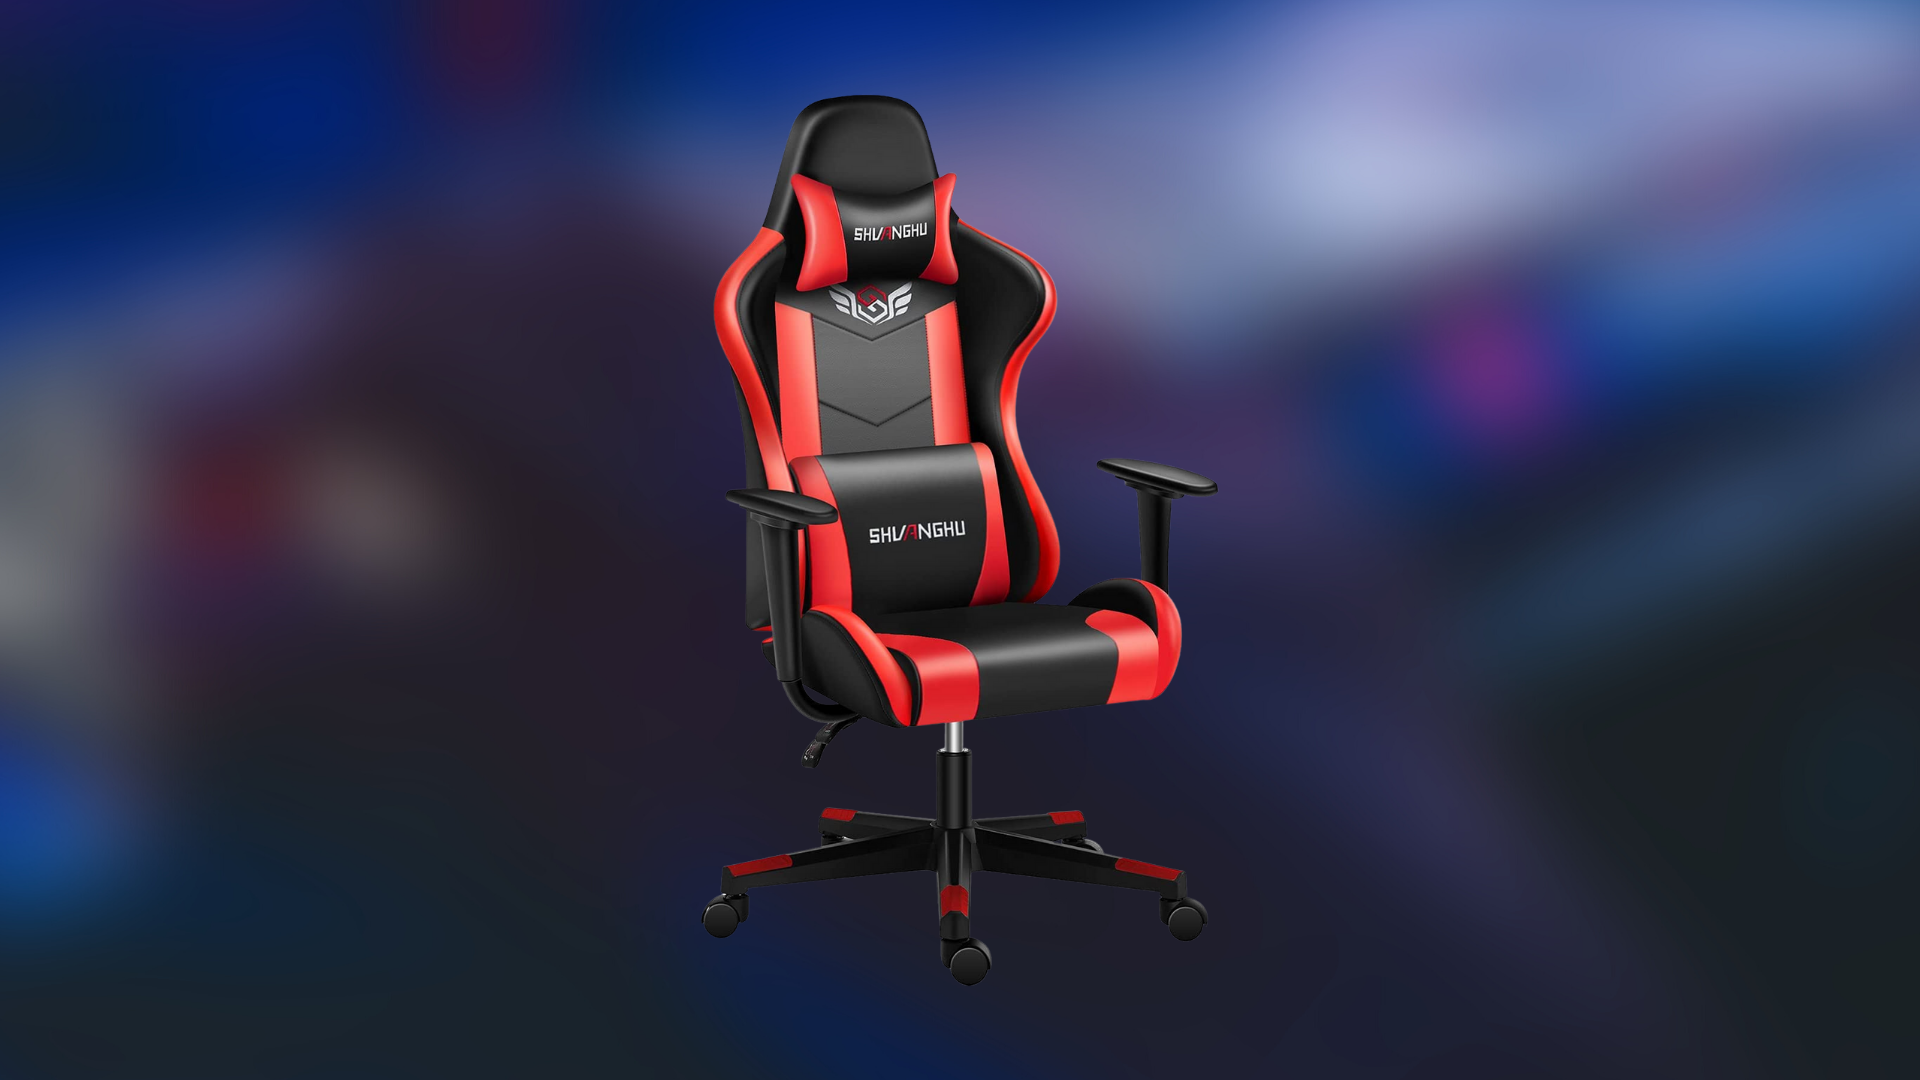 Top 13 best gaming chair under 100 in 2021 - TDH US